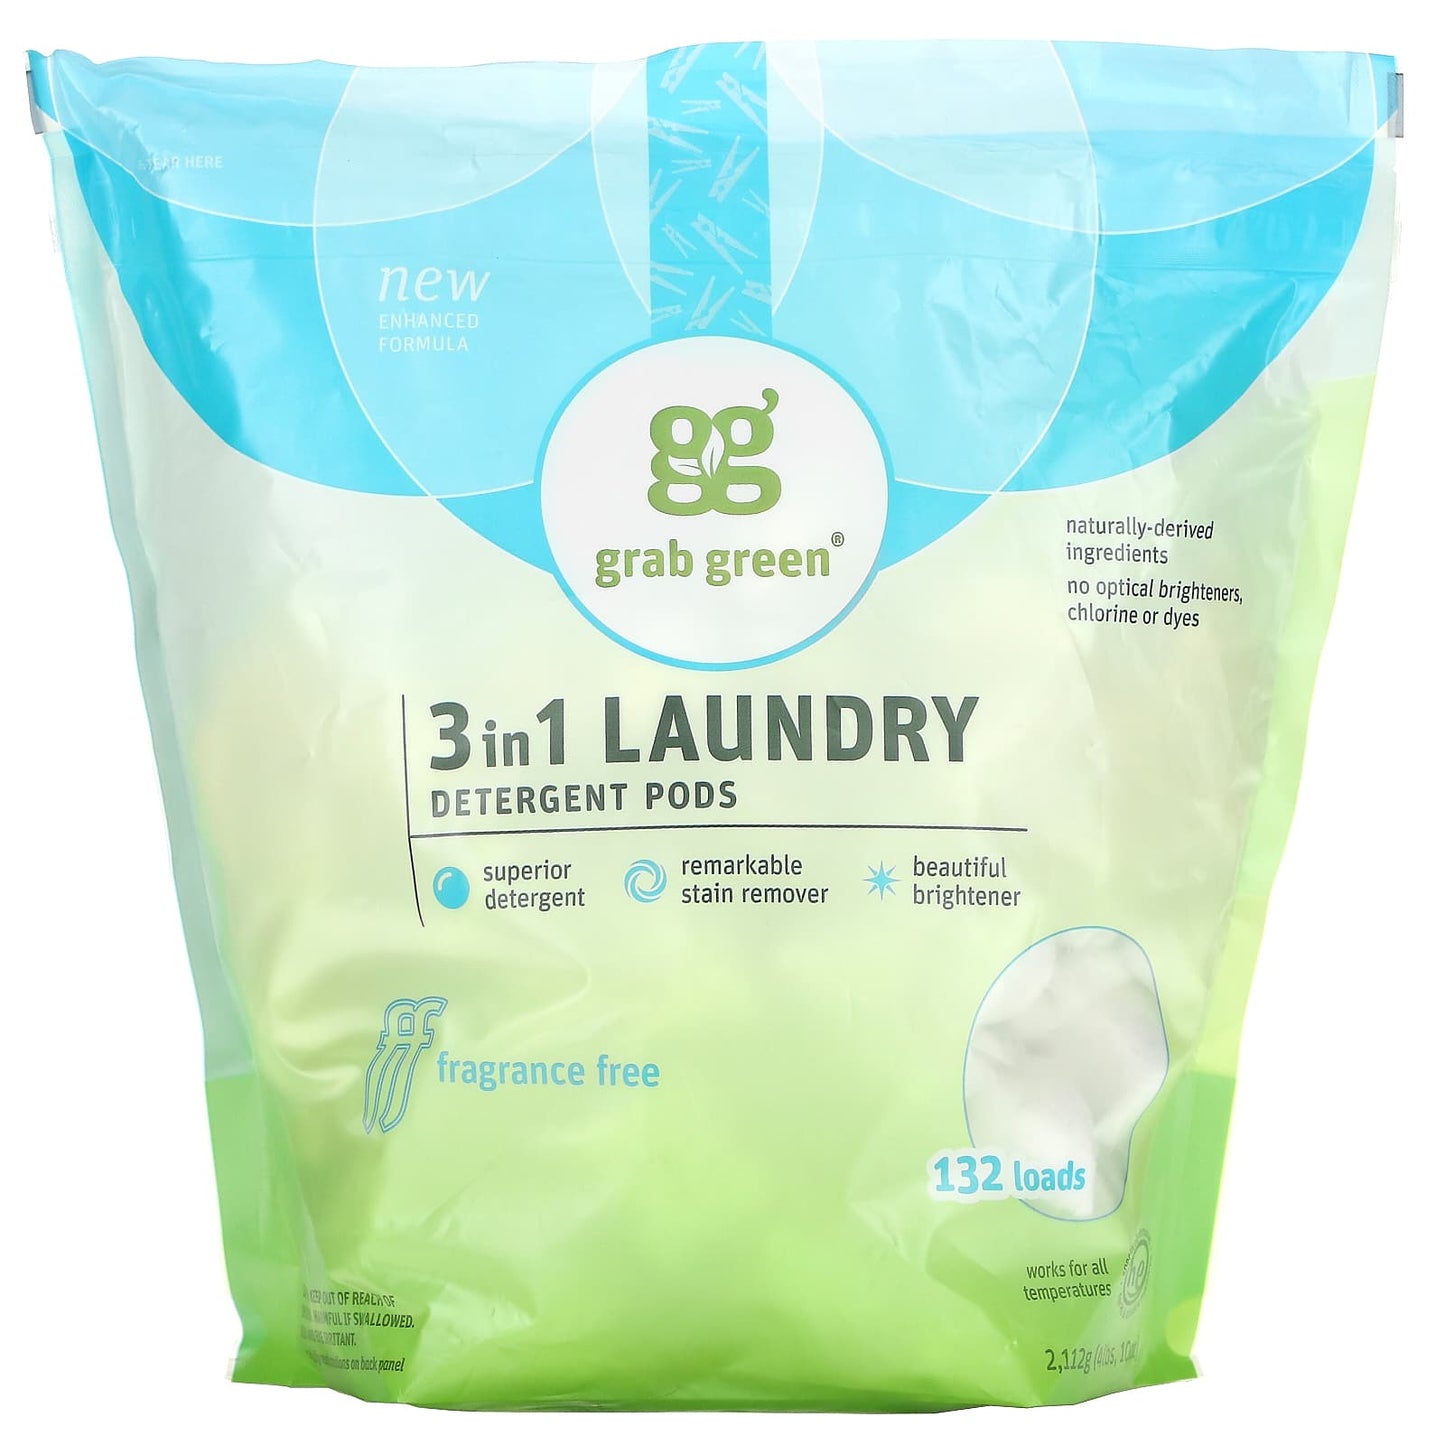 Grab Green-3-in-1 Laundry Detergent Pods-Fragrance Free-132 Loads-4 lbs 10 oz (2112 g)